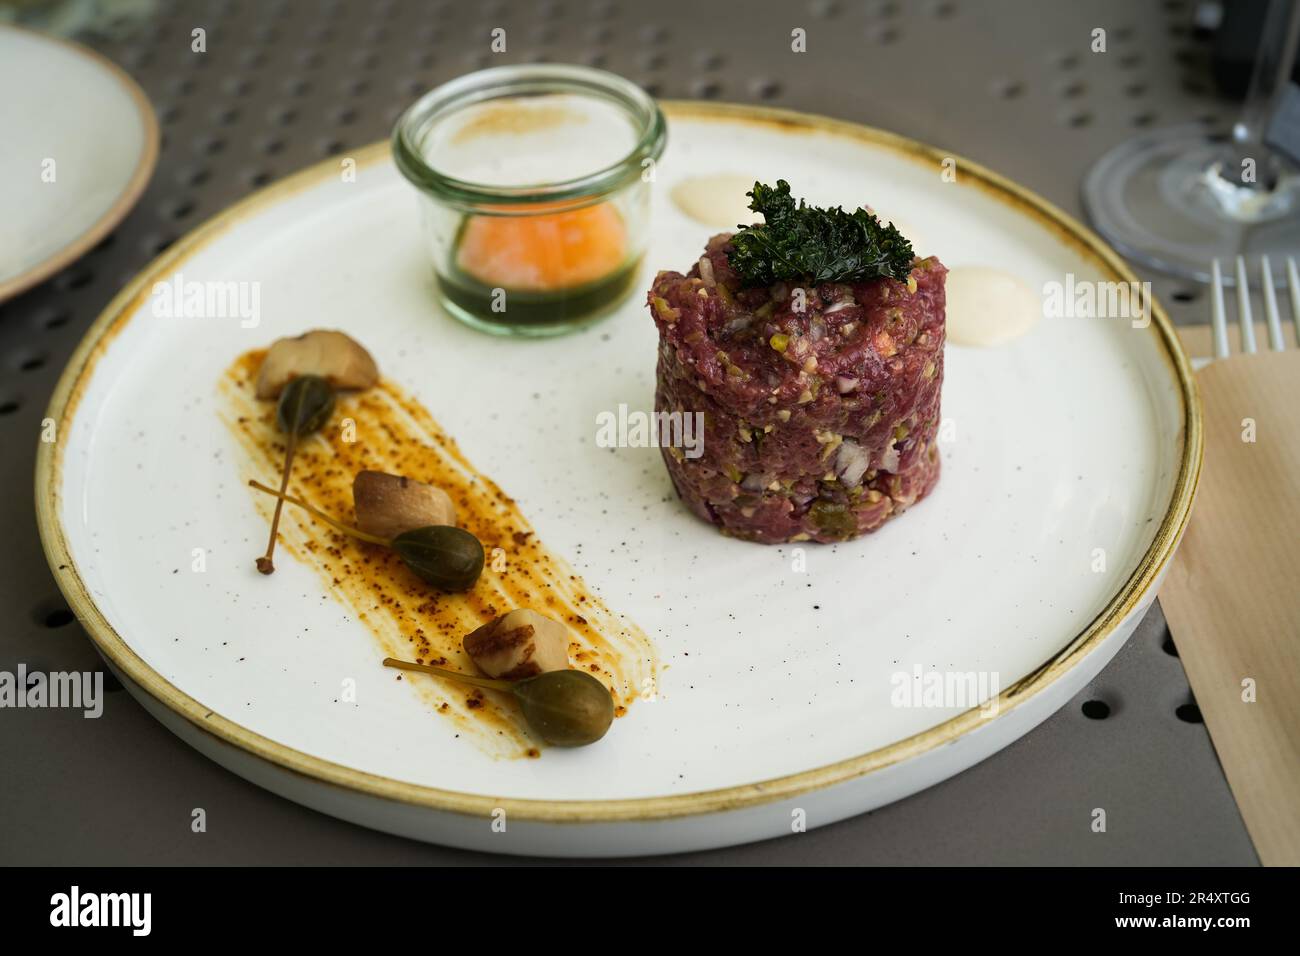 Steak tartare with raw ground beef, kale, raw egg yolk, and capers on a white plate with a golden rim. Keto diet, raw healthy eating gourmet Stock Photo